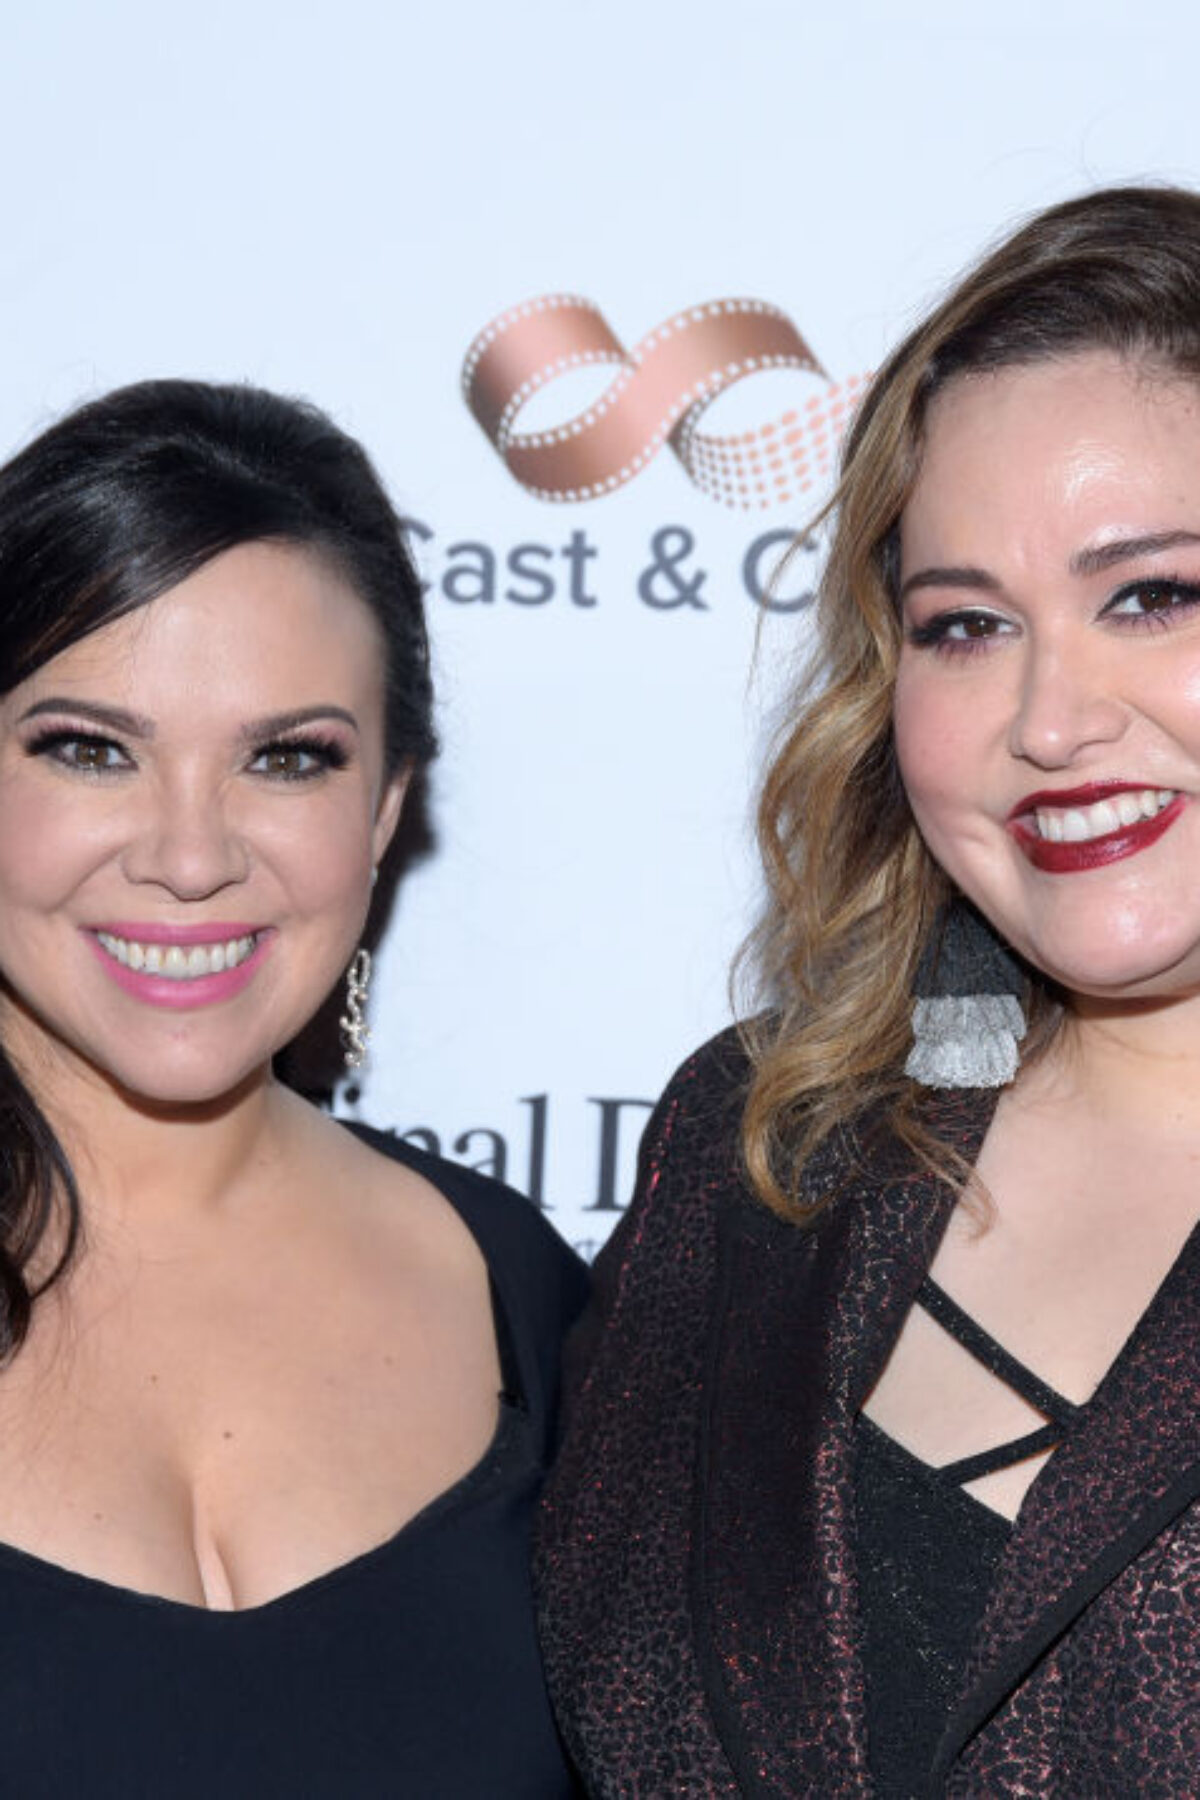 HOLLYWOOD, CALIFORNIA - JANUARY 29: Gloria Calderon and Tanya Saracho attend the 14th annual Final Draft Awards at Paramount Theatre on January 29, 2019 in Hollywood, California. (Photo by Michael Tullberg/Getty Images)